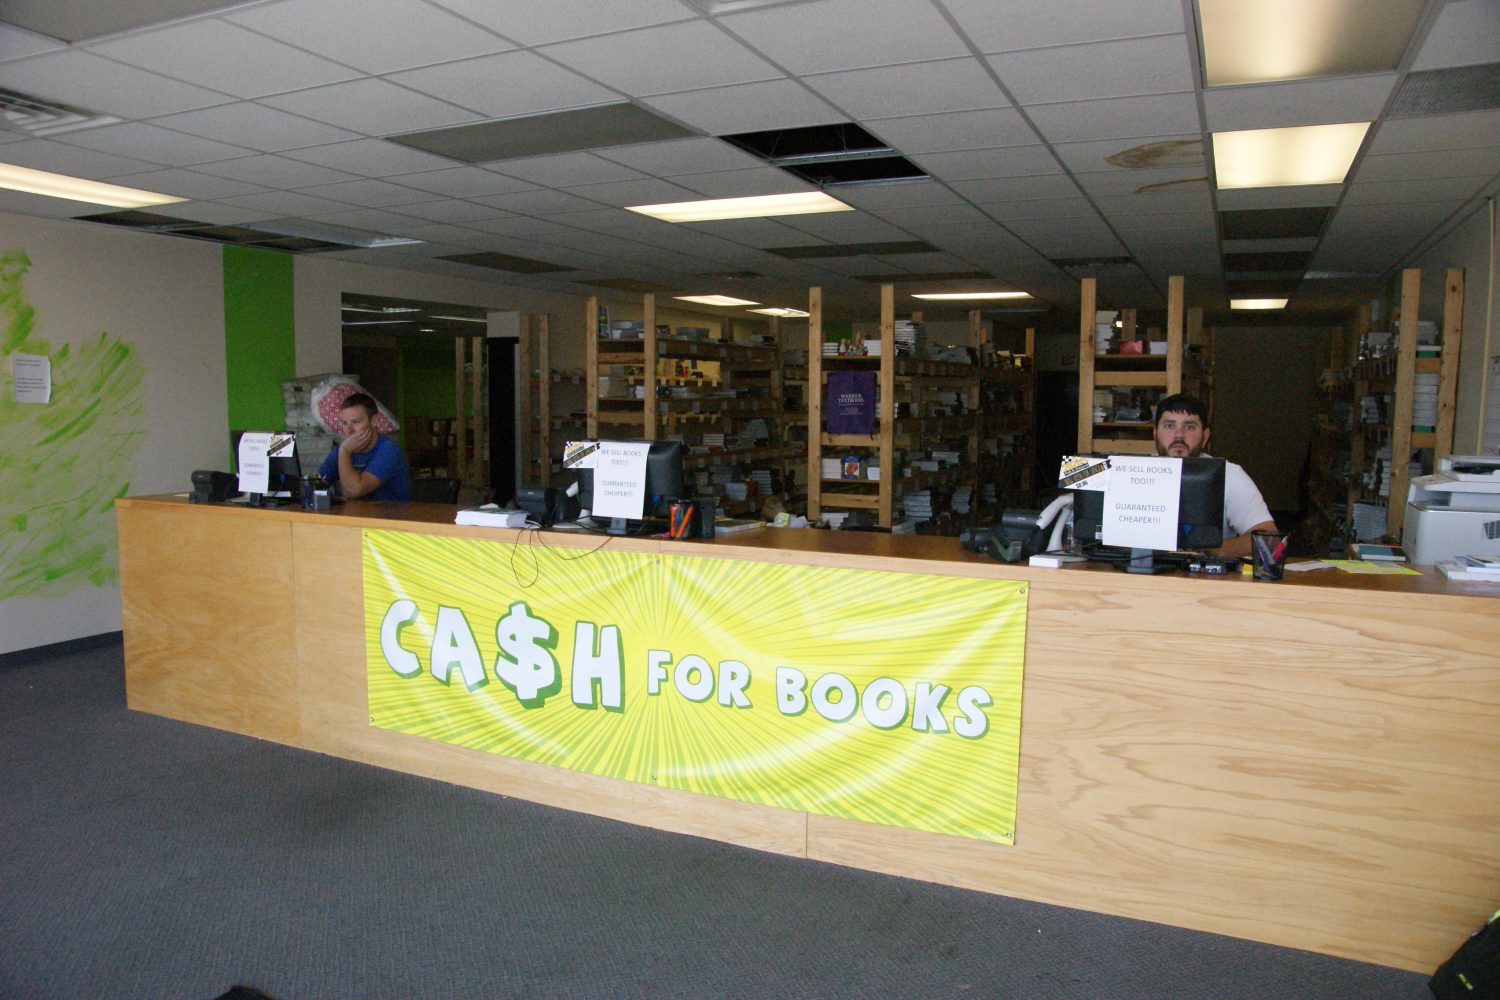 Warrior Textbooks, which opened in fall 2011, competes with the Winona State University Bookstore. 
MATTHEW SECKORA